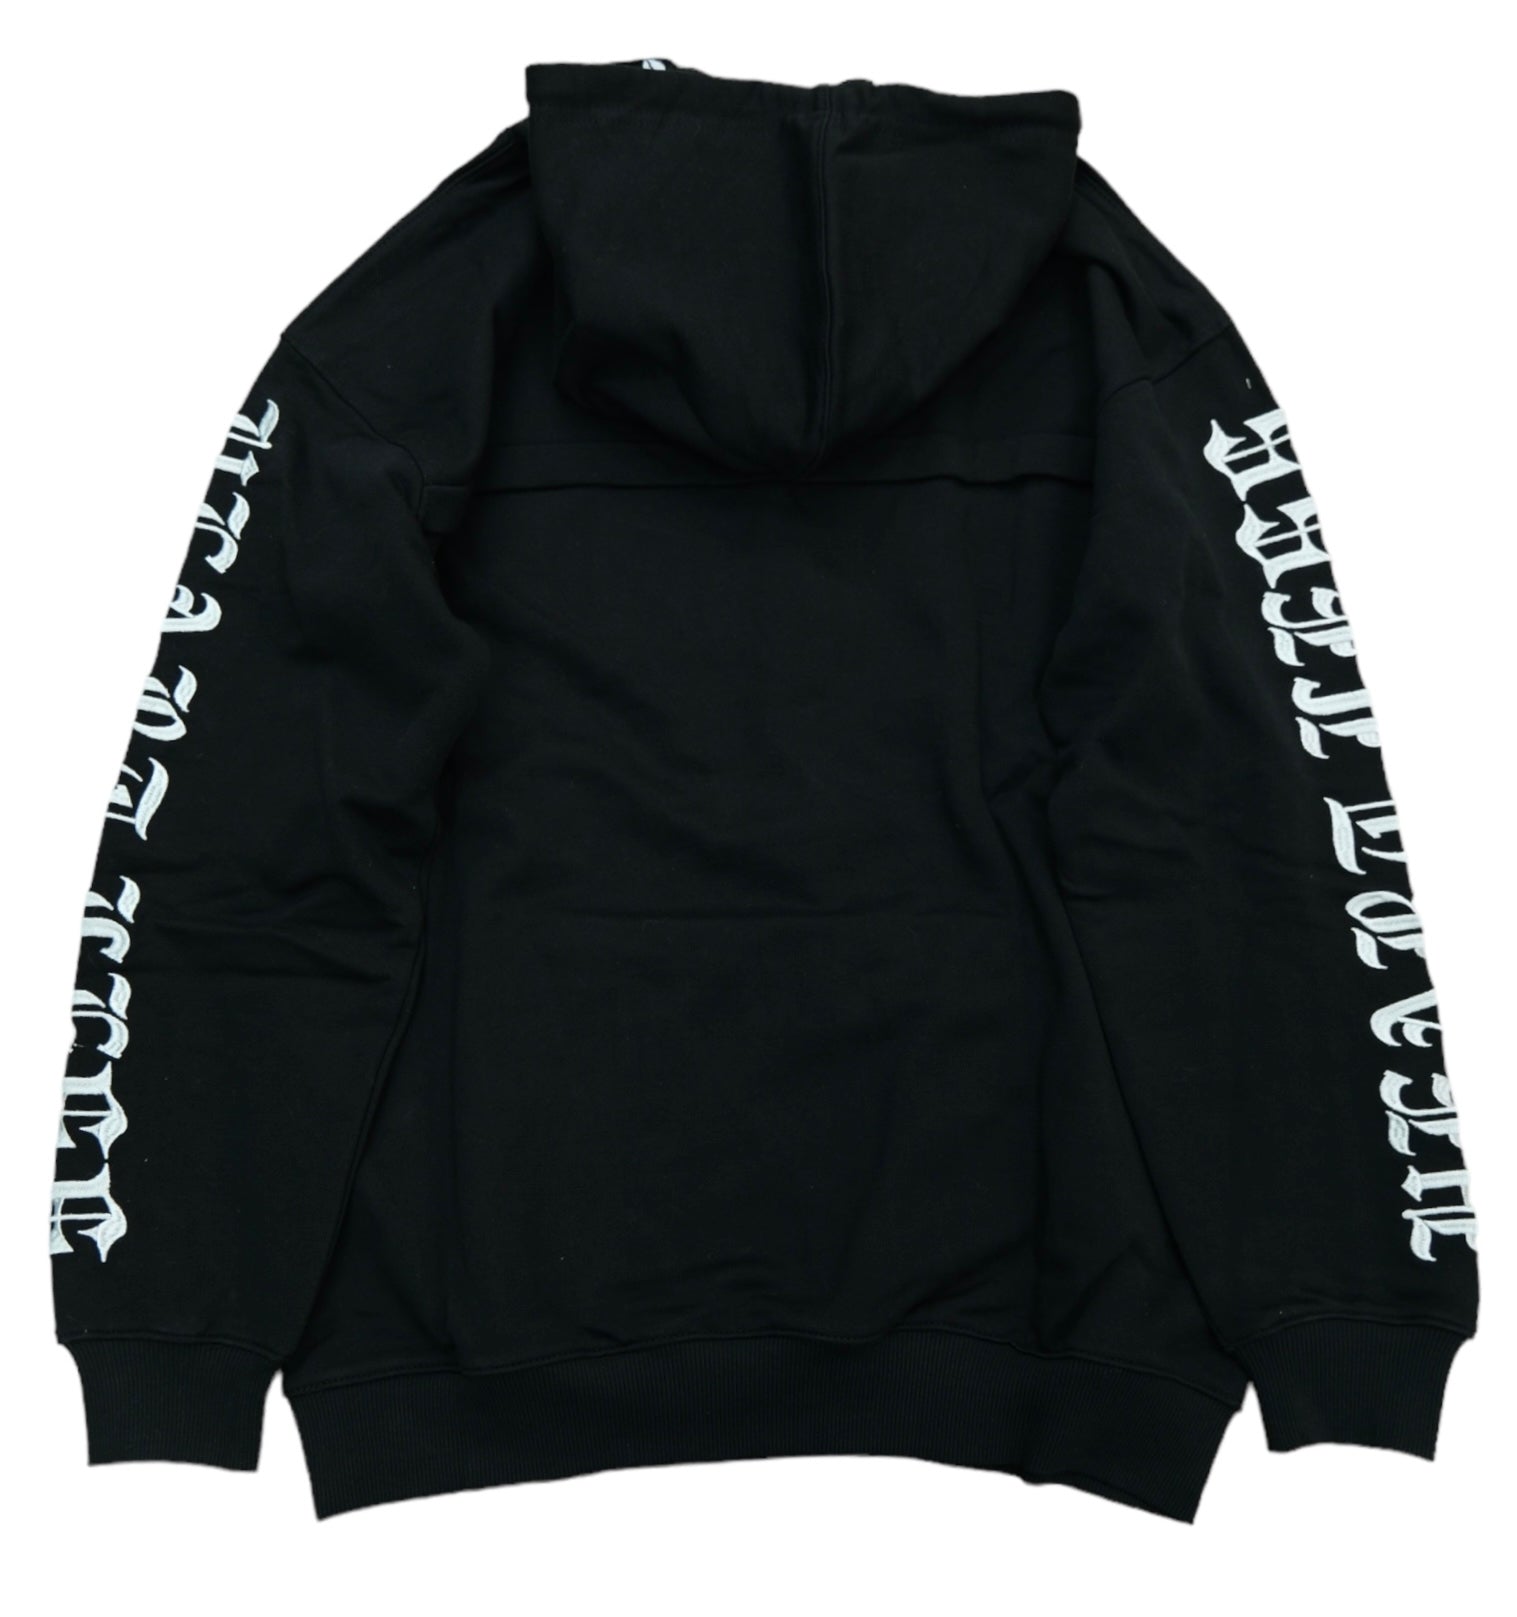 Focus Heartless Stacked Sweatsuit (Black)